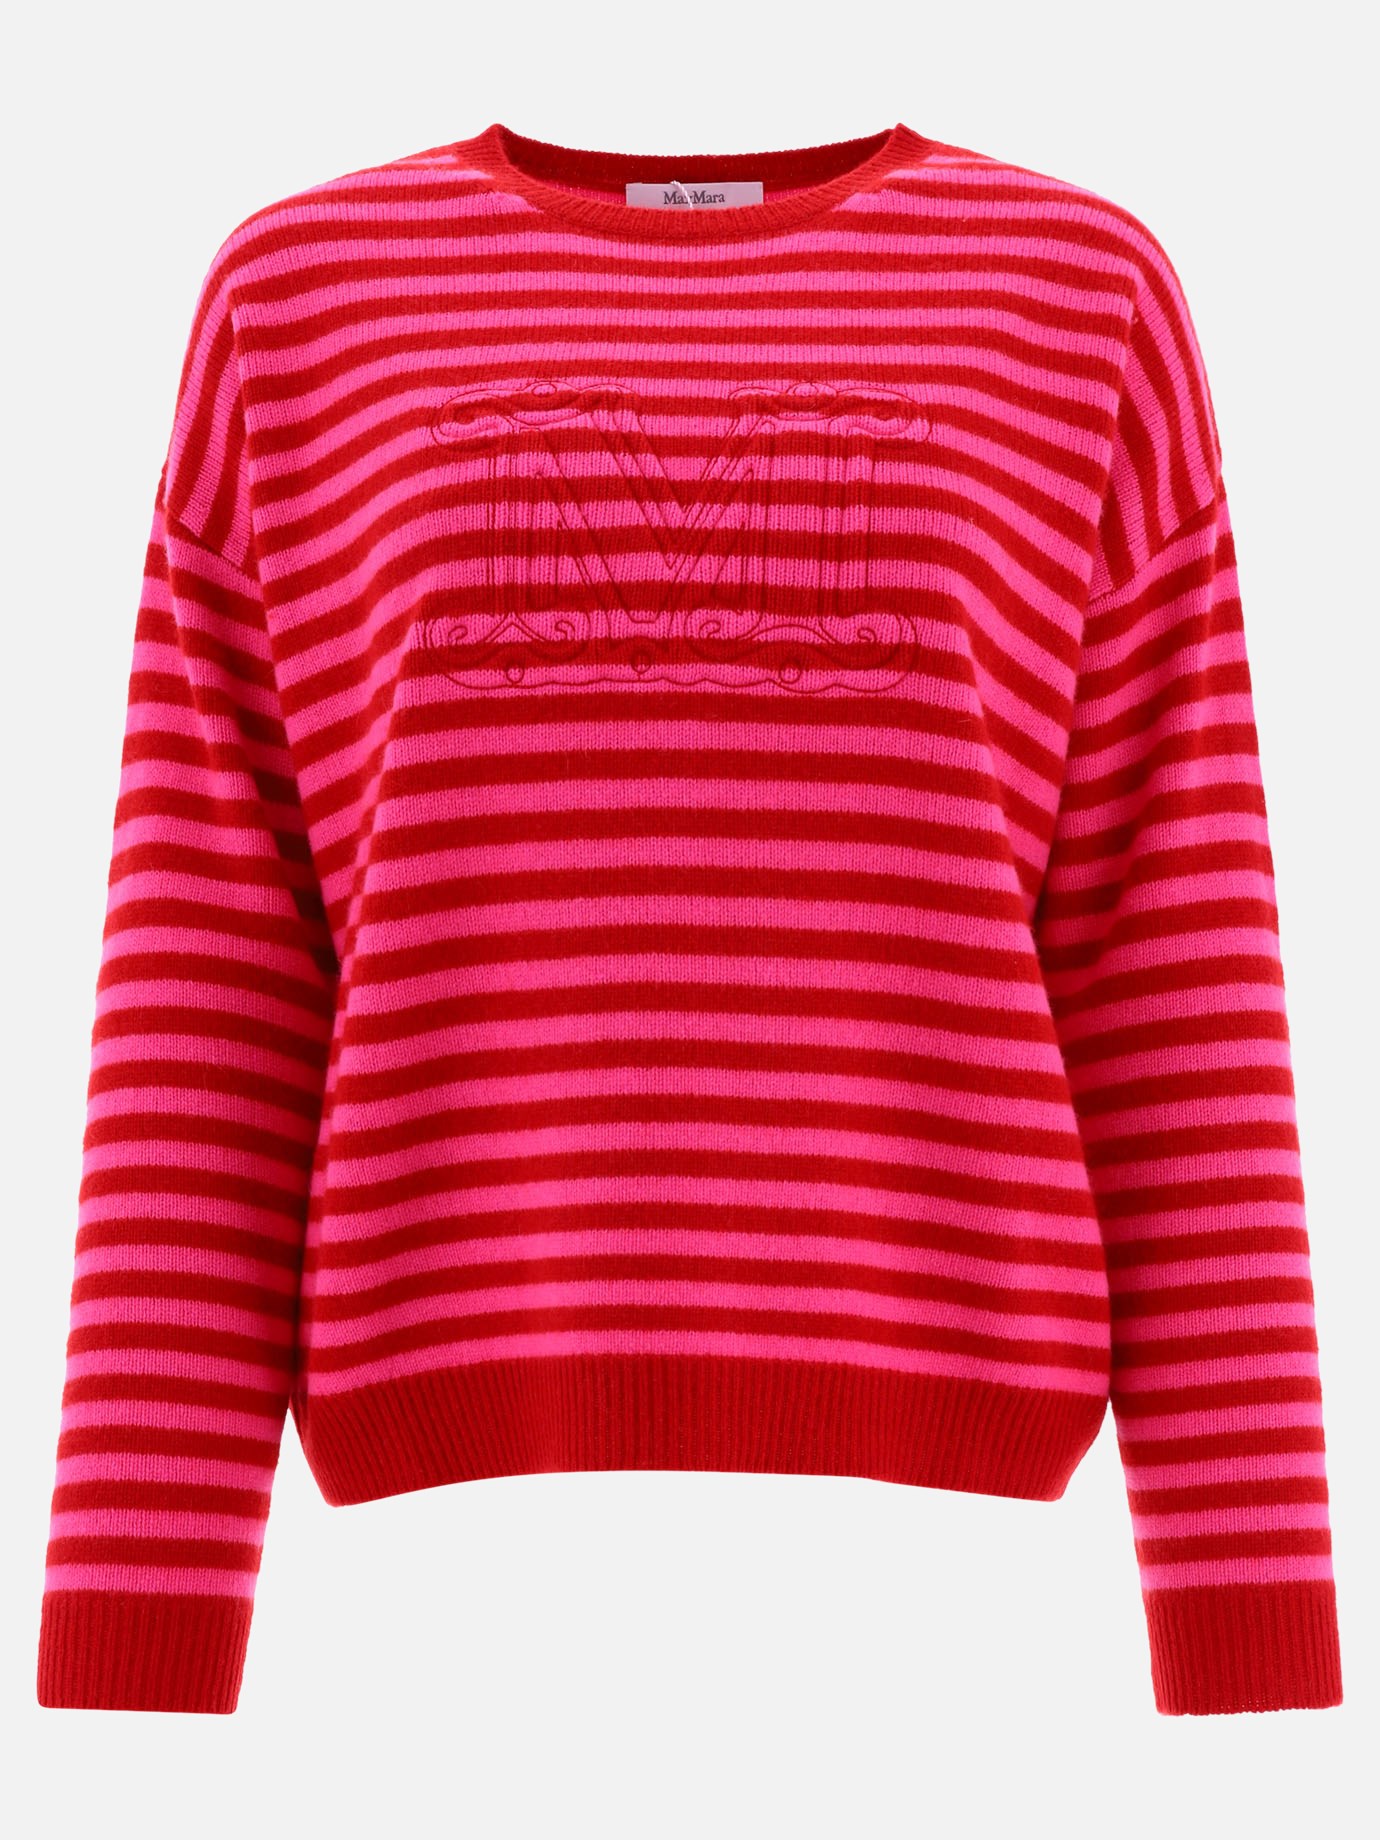  Aster  striped sweater by Max Mara